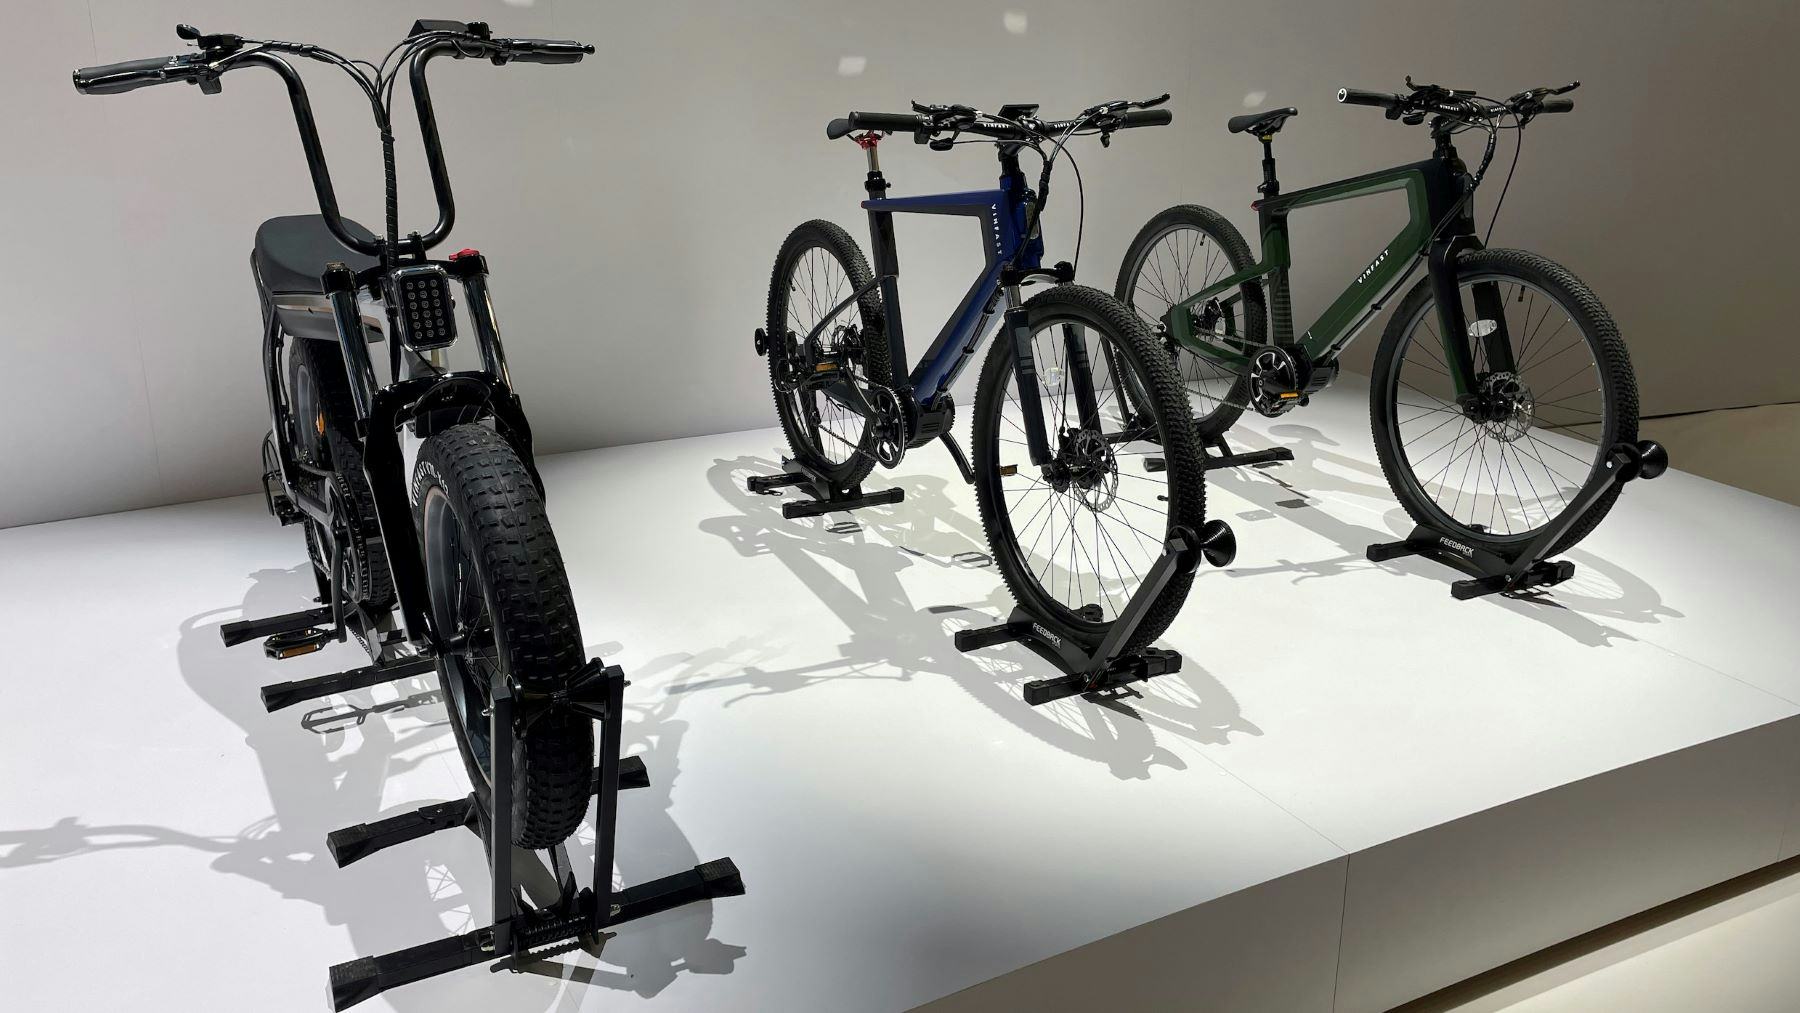 An increasing number of Asian manufacturers decided to exhibit at CES. One of those was the Vietnamese car manufacturer Vinfast who unveiled a range of concept e-bikes. – Photos Michel de Chavanon